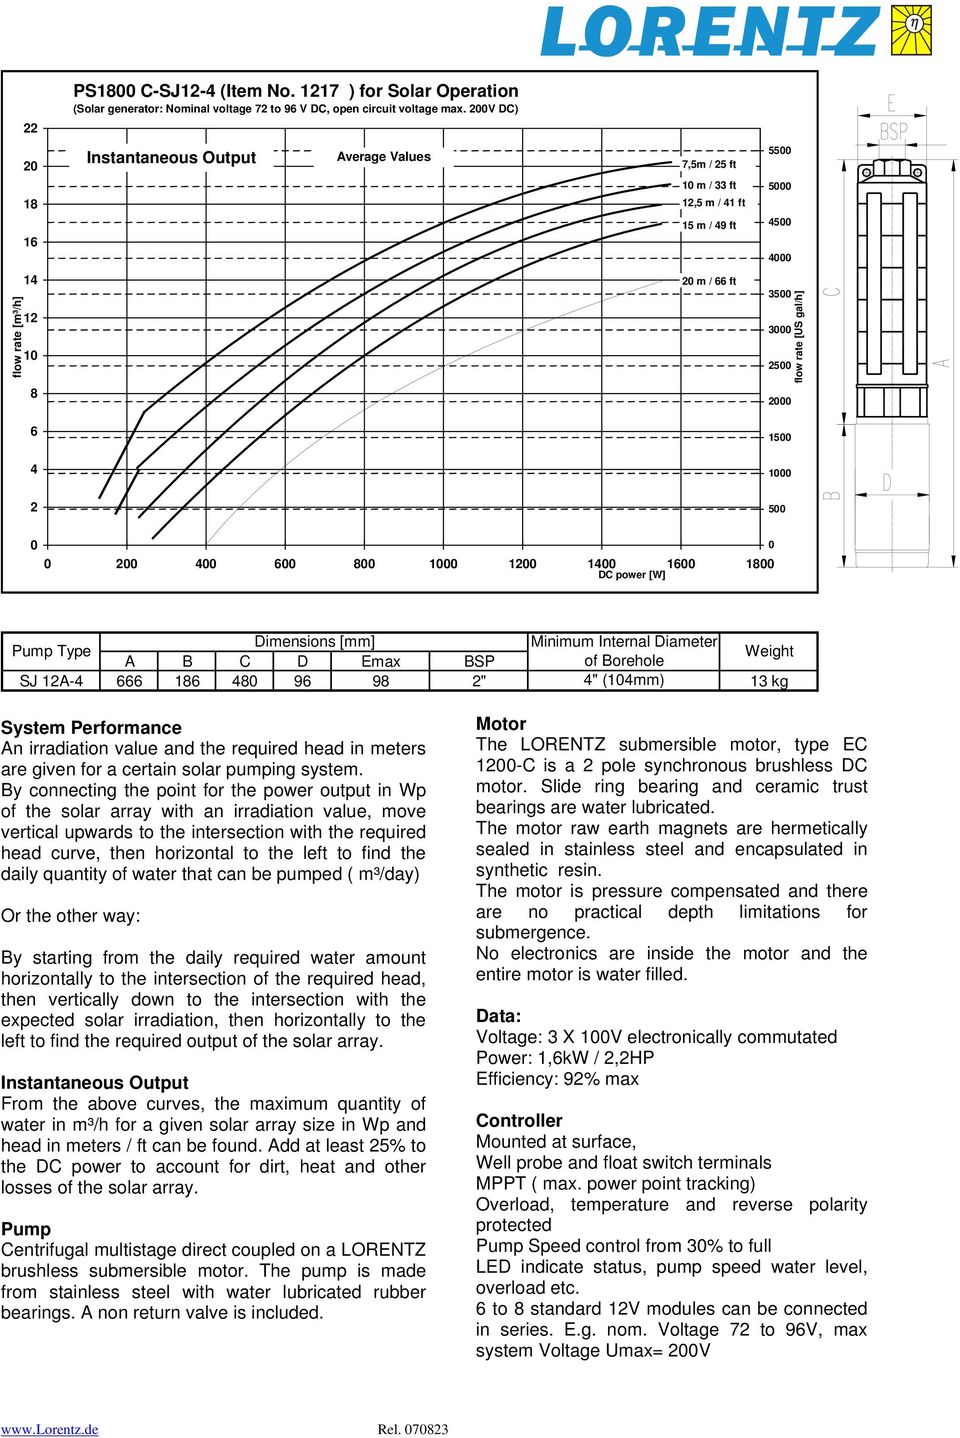 Dimensions [mm] Minimum Internal Diameter Pump Type Weight A B C D Emax BSP of Borehole SJ 12A-4 666 16 4 96 9 2" 4" (14mm) 13 kg System Performance An irradiation value and the required head in